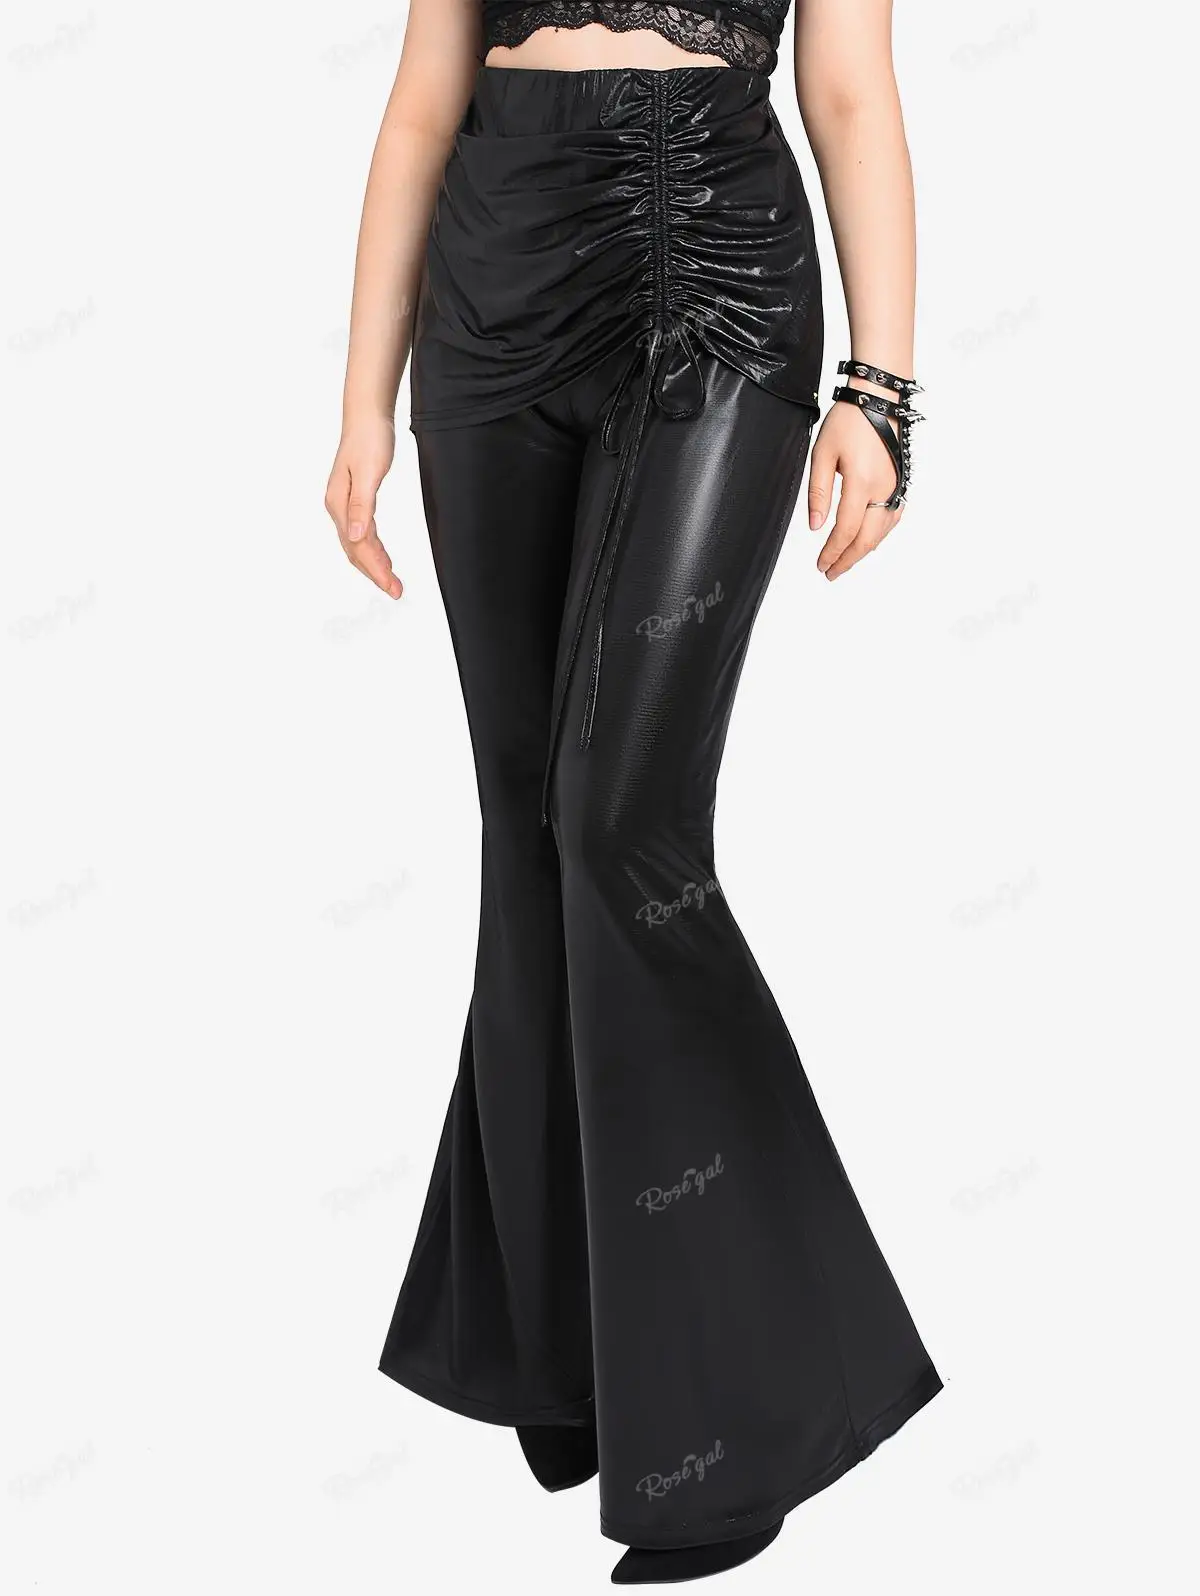 

ROSEGAL Plus Size Gothic Cinched Flare Pants Bell Bottom Pull On Pant Women New High Waist Streetwear Ruched Trousers Mujer